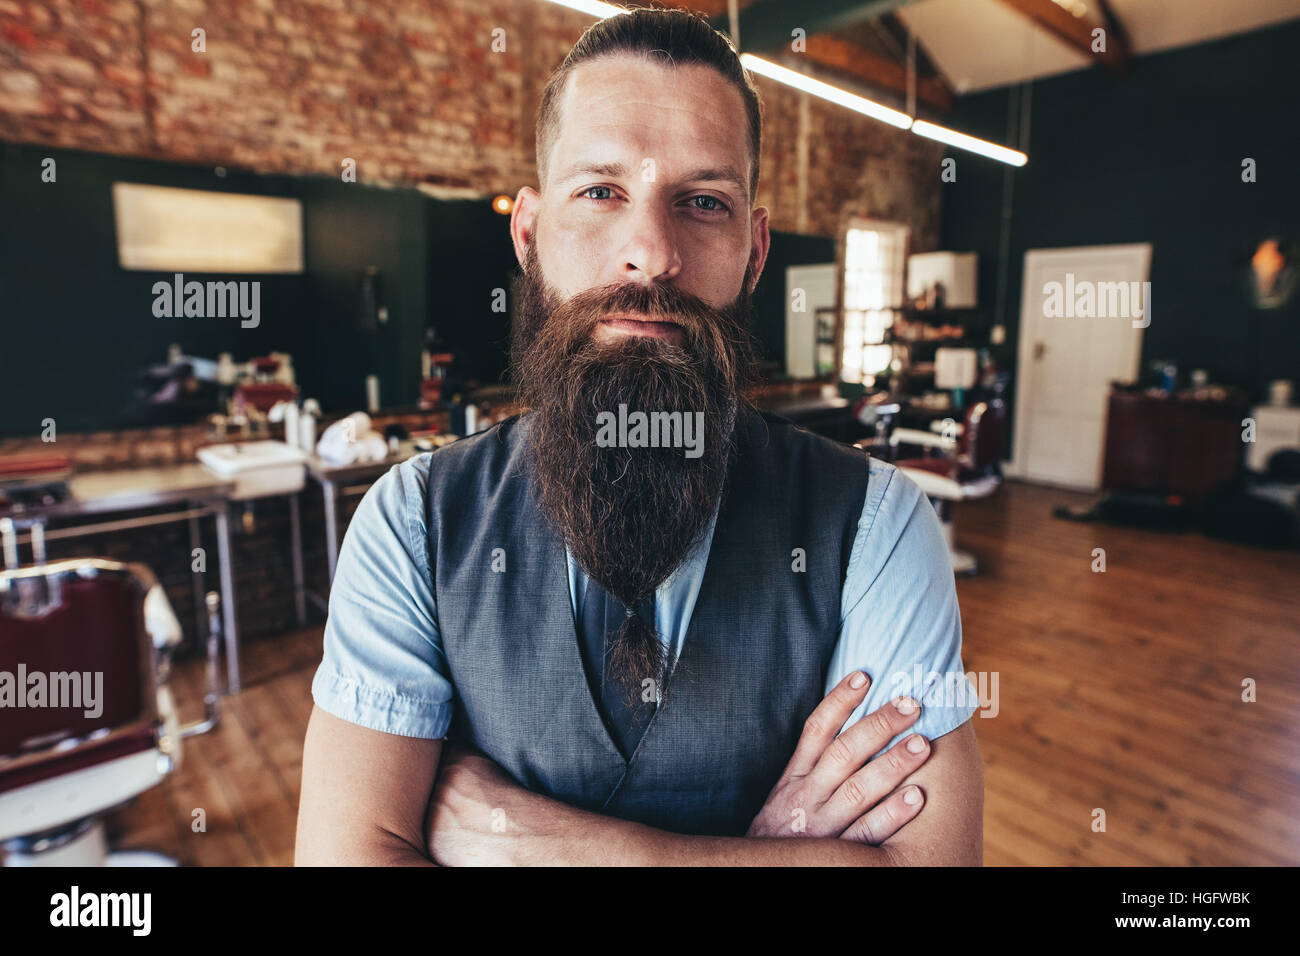 Young barber at his barbershop. Man standing with his arms crossed and staring at camera. Stock Photo